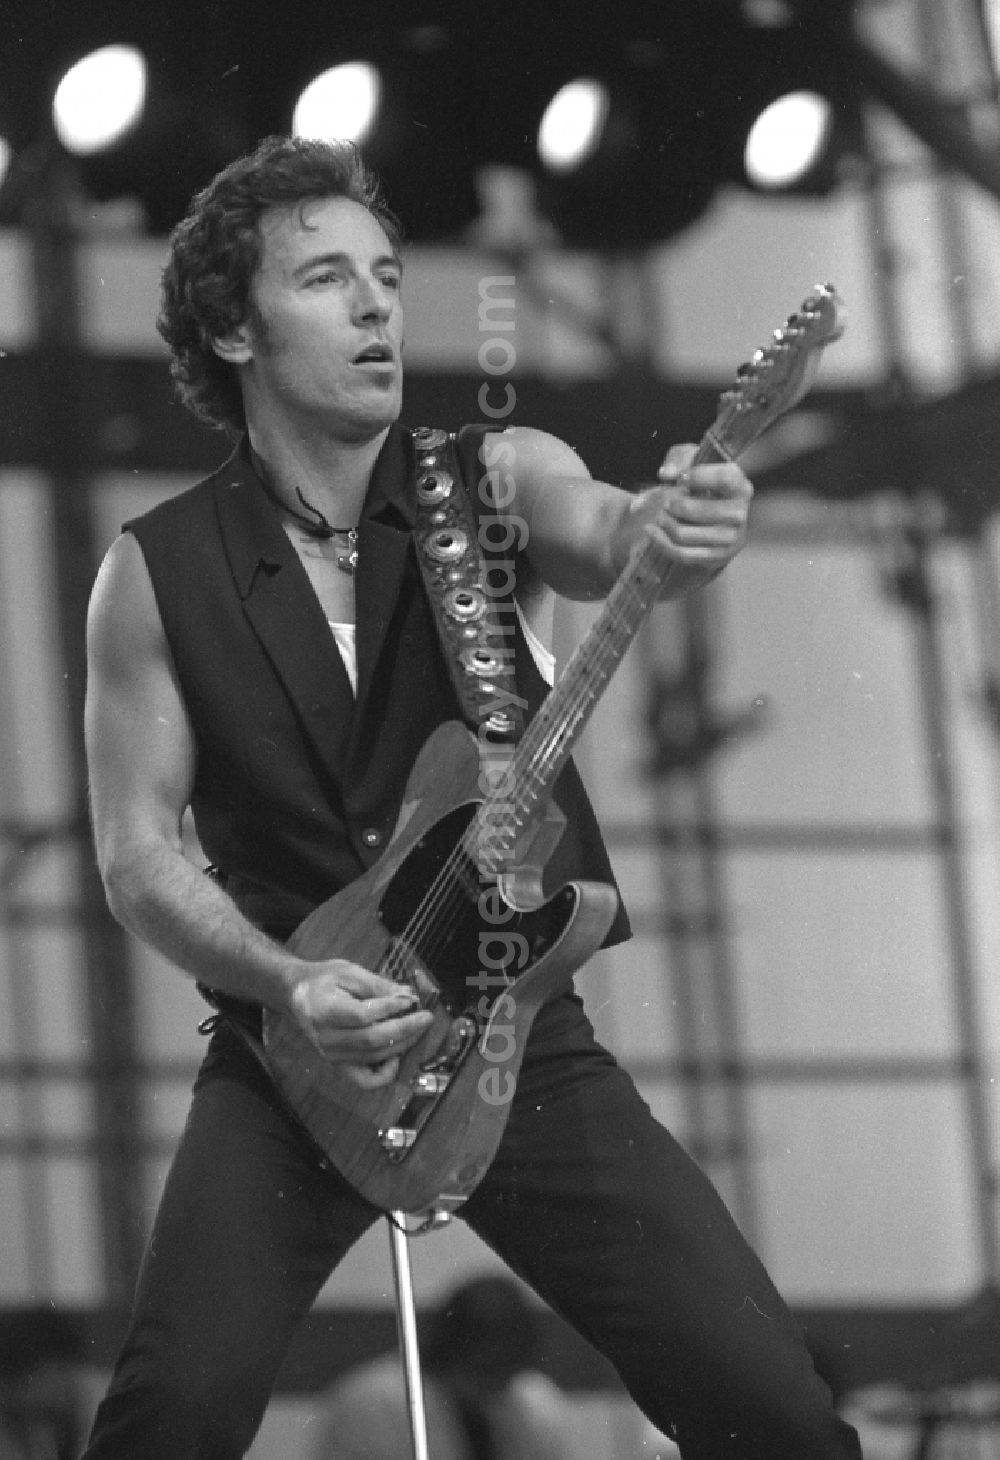 GDR image archive: Berlin - Portrait shot of the singer and musician Bruce Springsteen in the district Weissensee in Berlin Eastberlin on the territory of the former GDR, German Democratic Republic